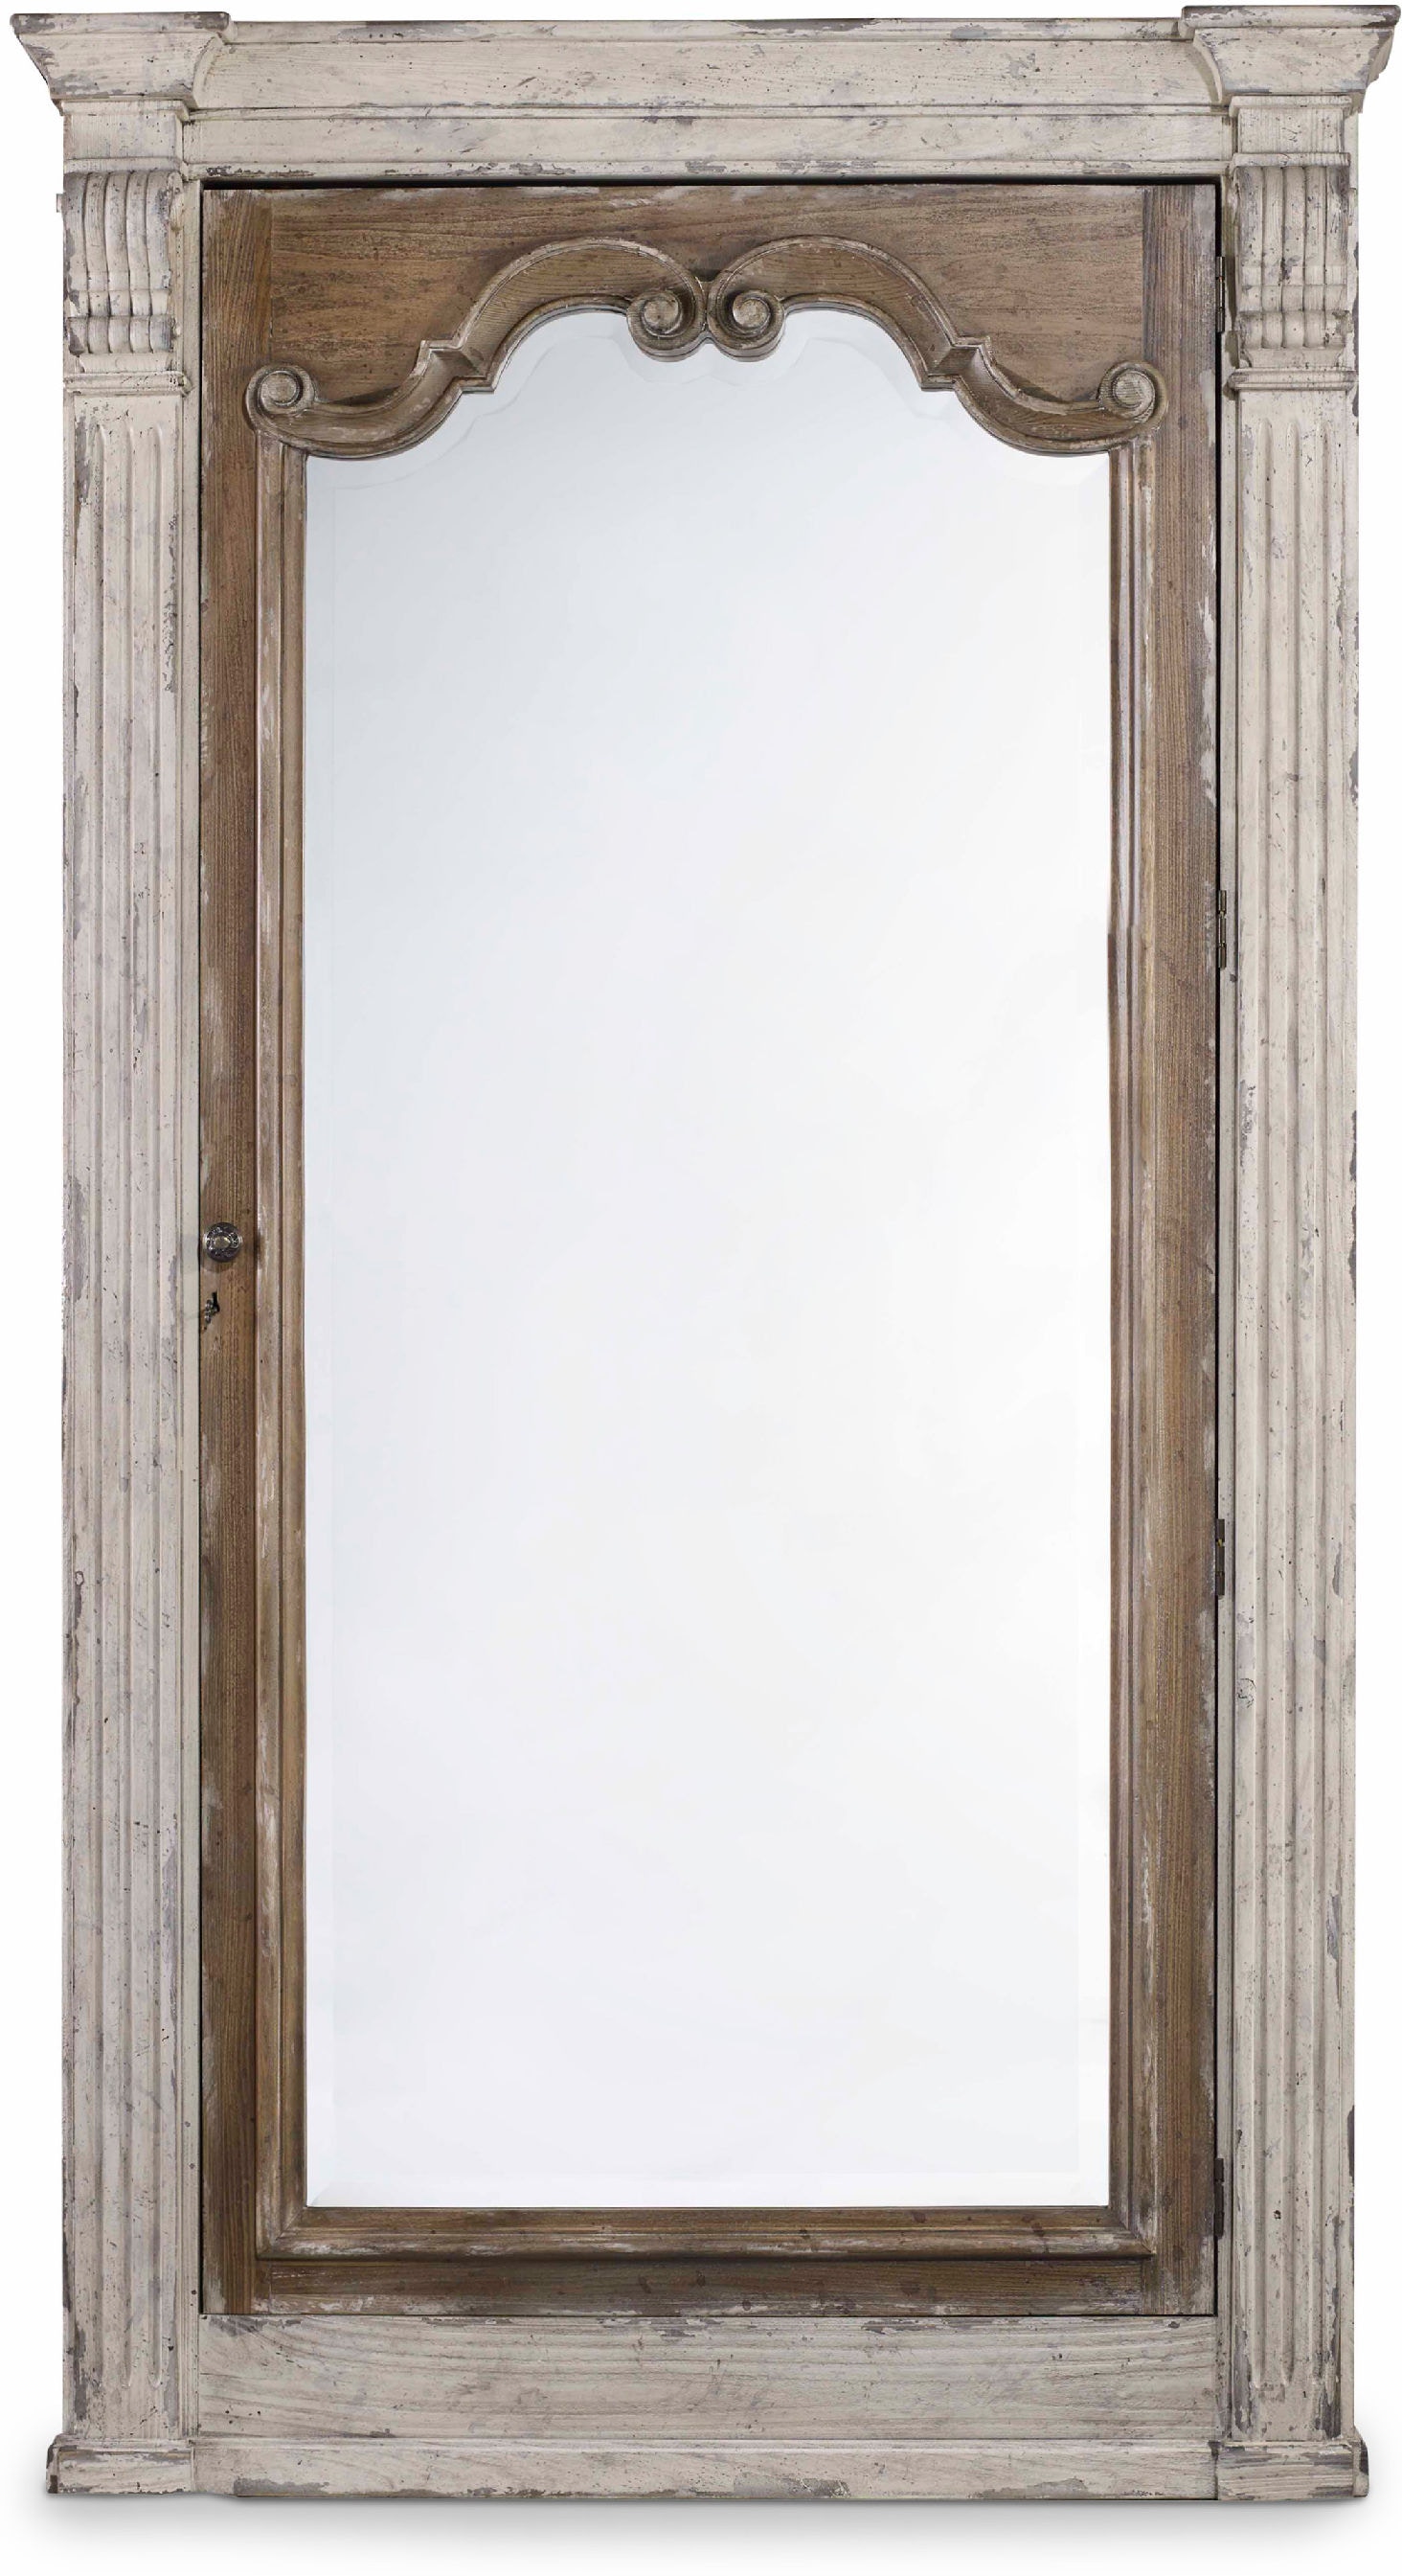 Hooker Furniture Accents Chatelet Floor Mirror W Jewelry Armoire